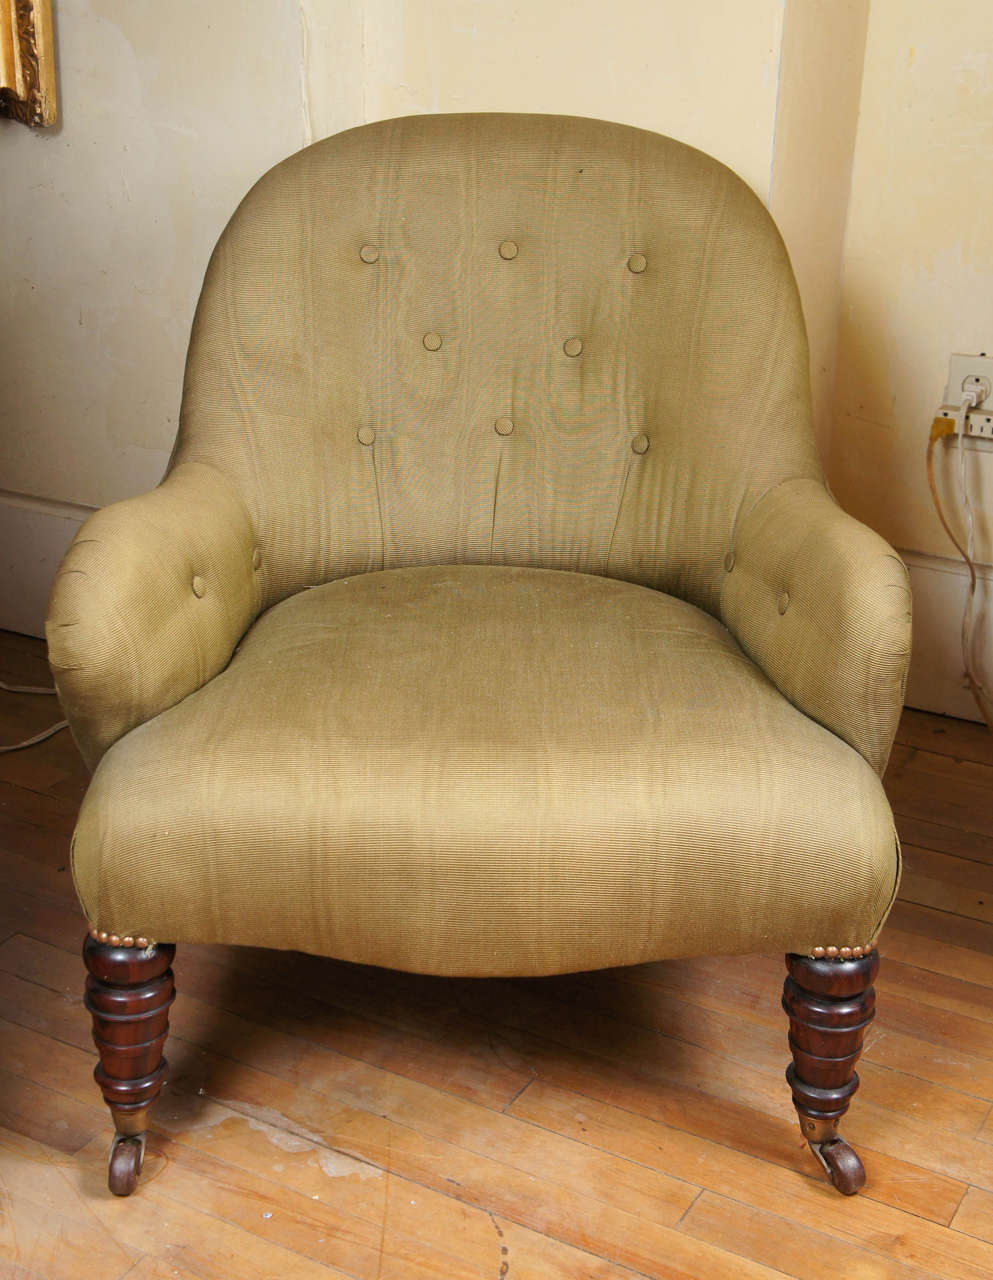 This fine comfortable chair crafted from rosewood is from the late Regency period, circa 1820. Low and well proportioned it was designed as the ideal form of seating for casual living. Rosewood a costly material from England's colonial Empire was a